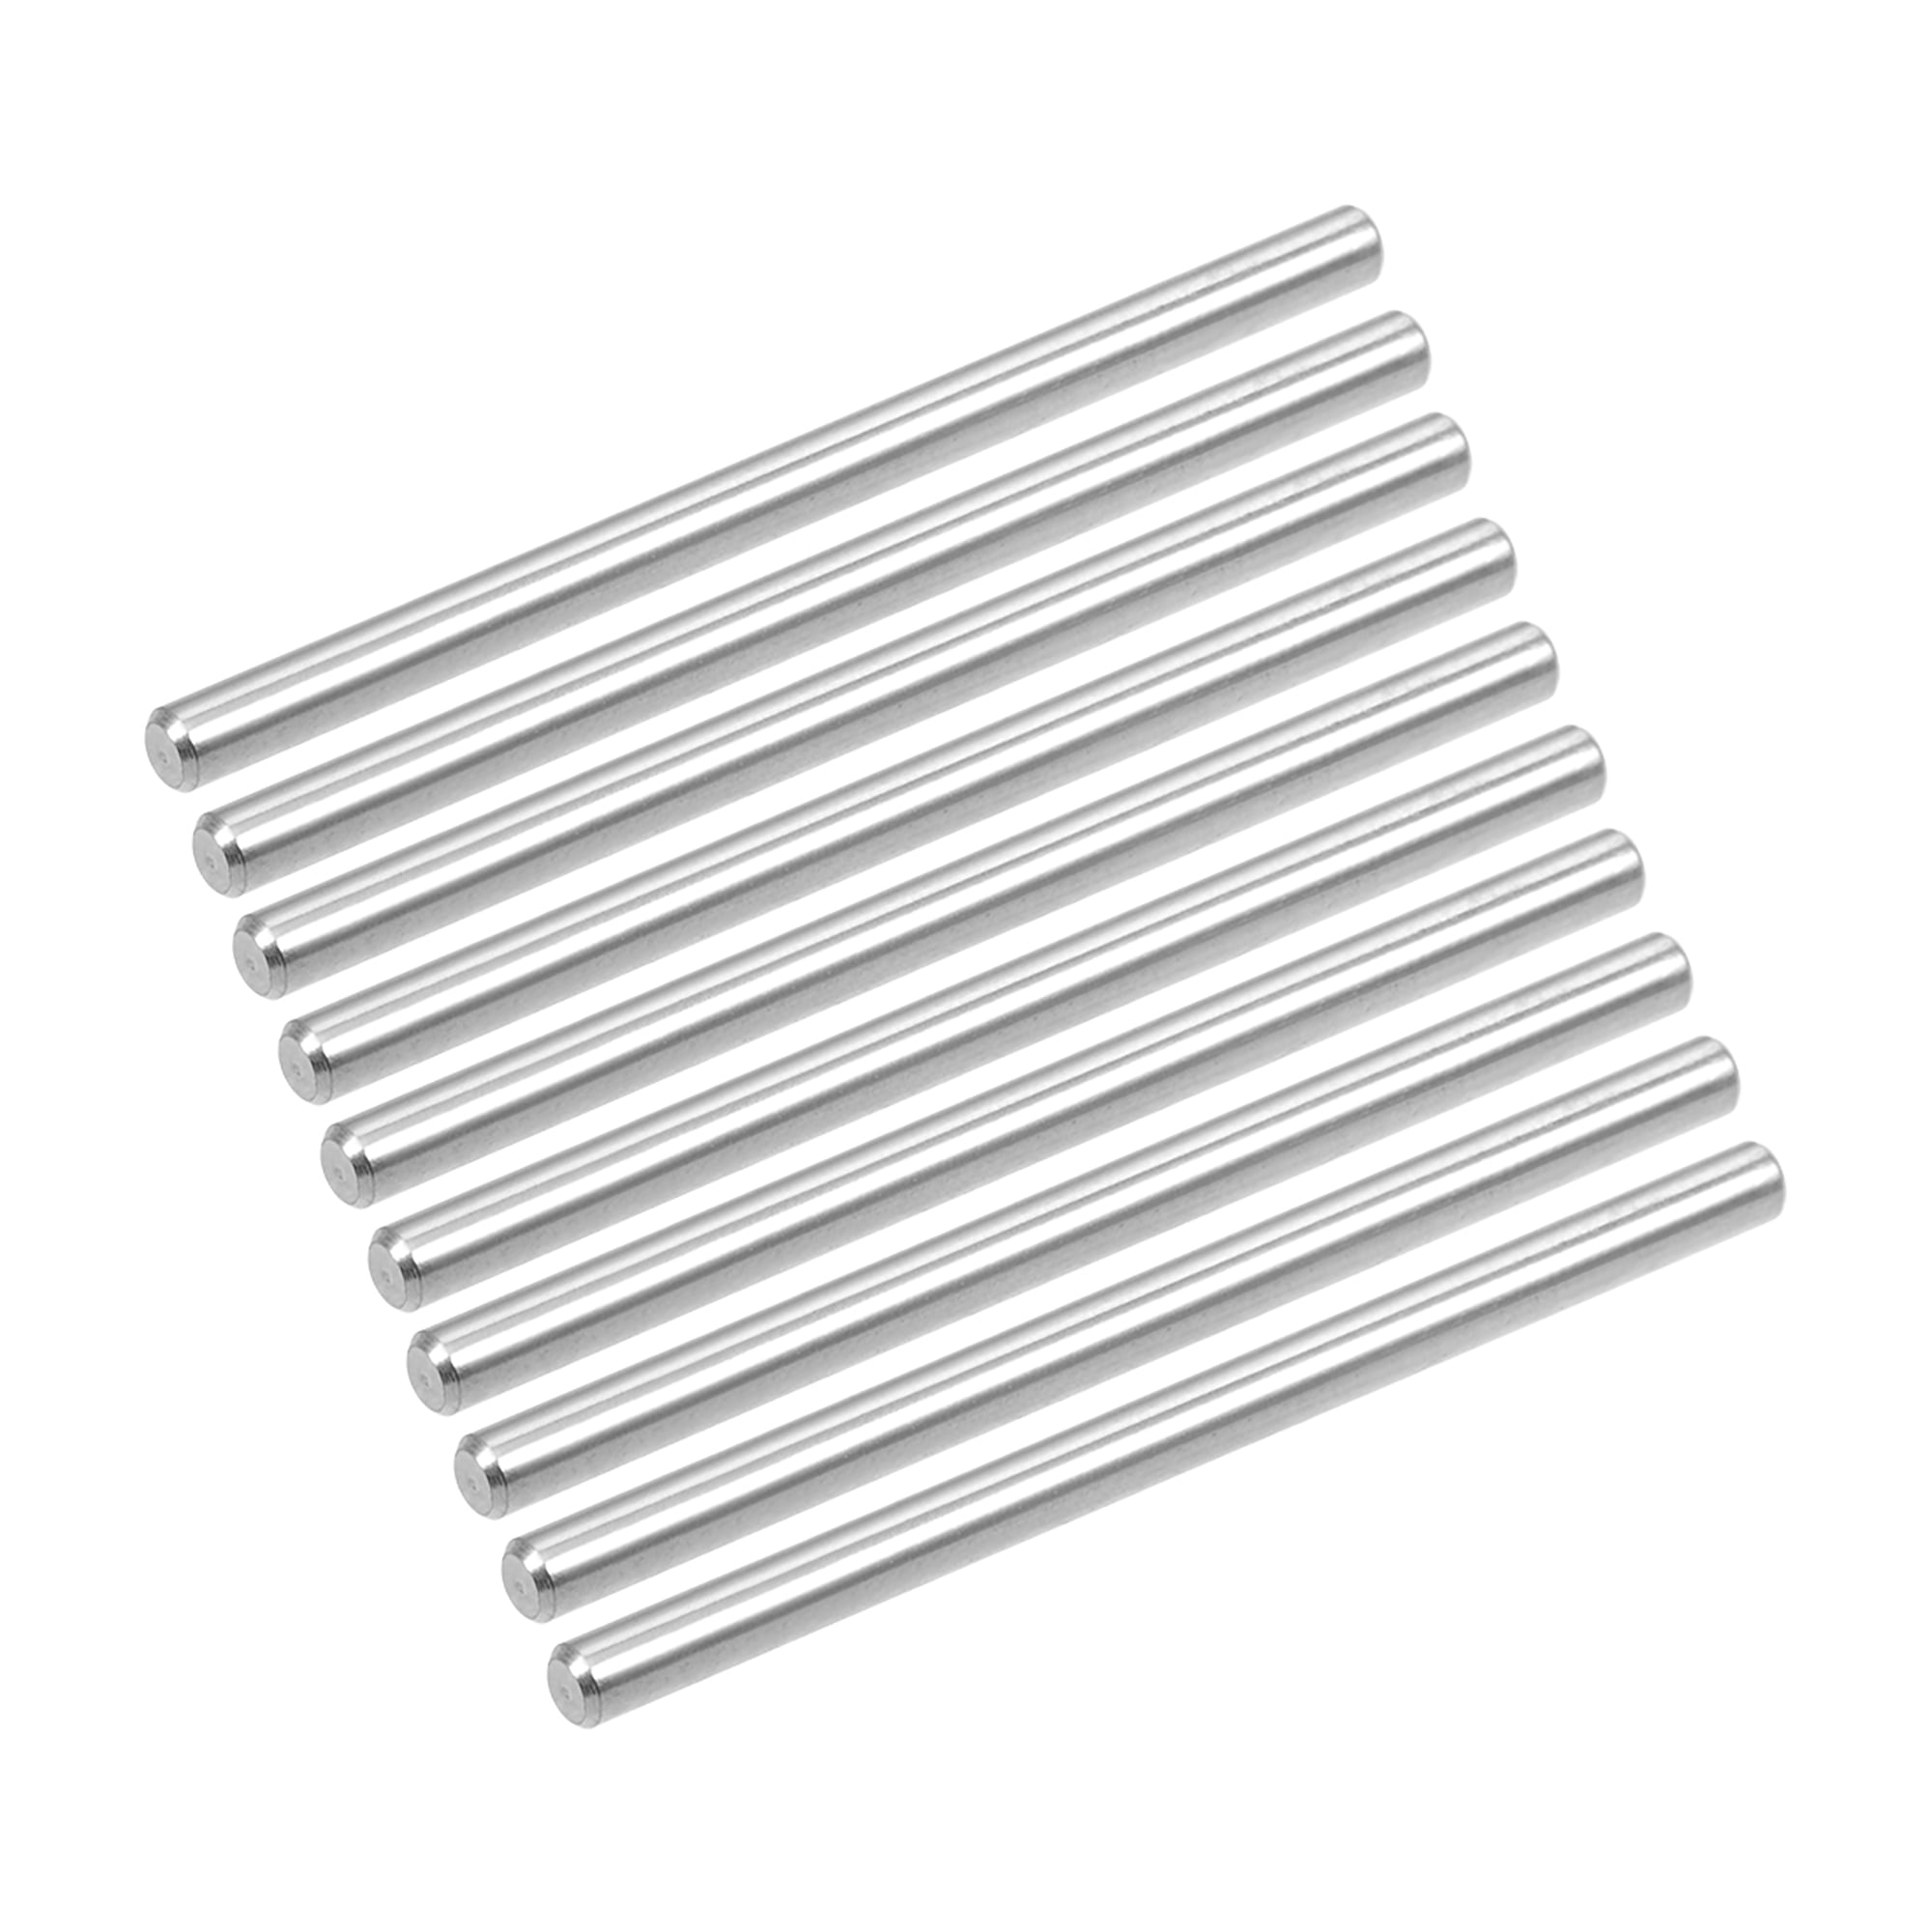 10pcs 3mmx50mm Dowel Pin 304 Stainless, Bunk Bed Pins